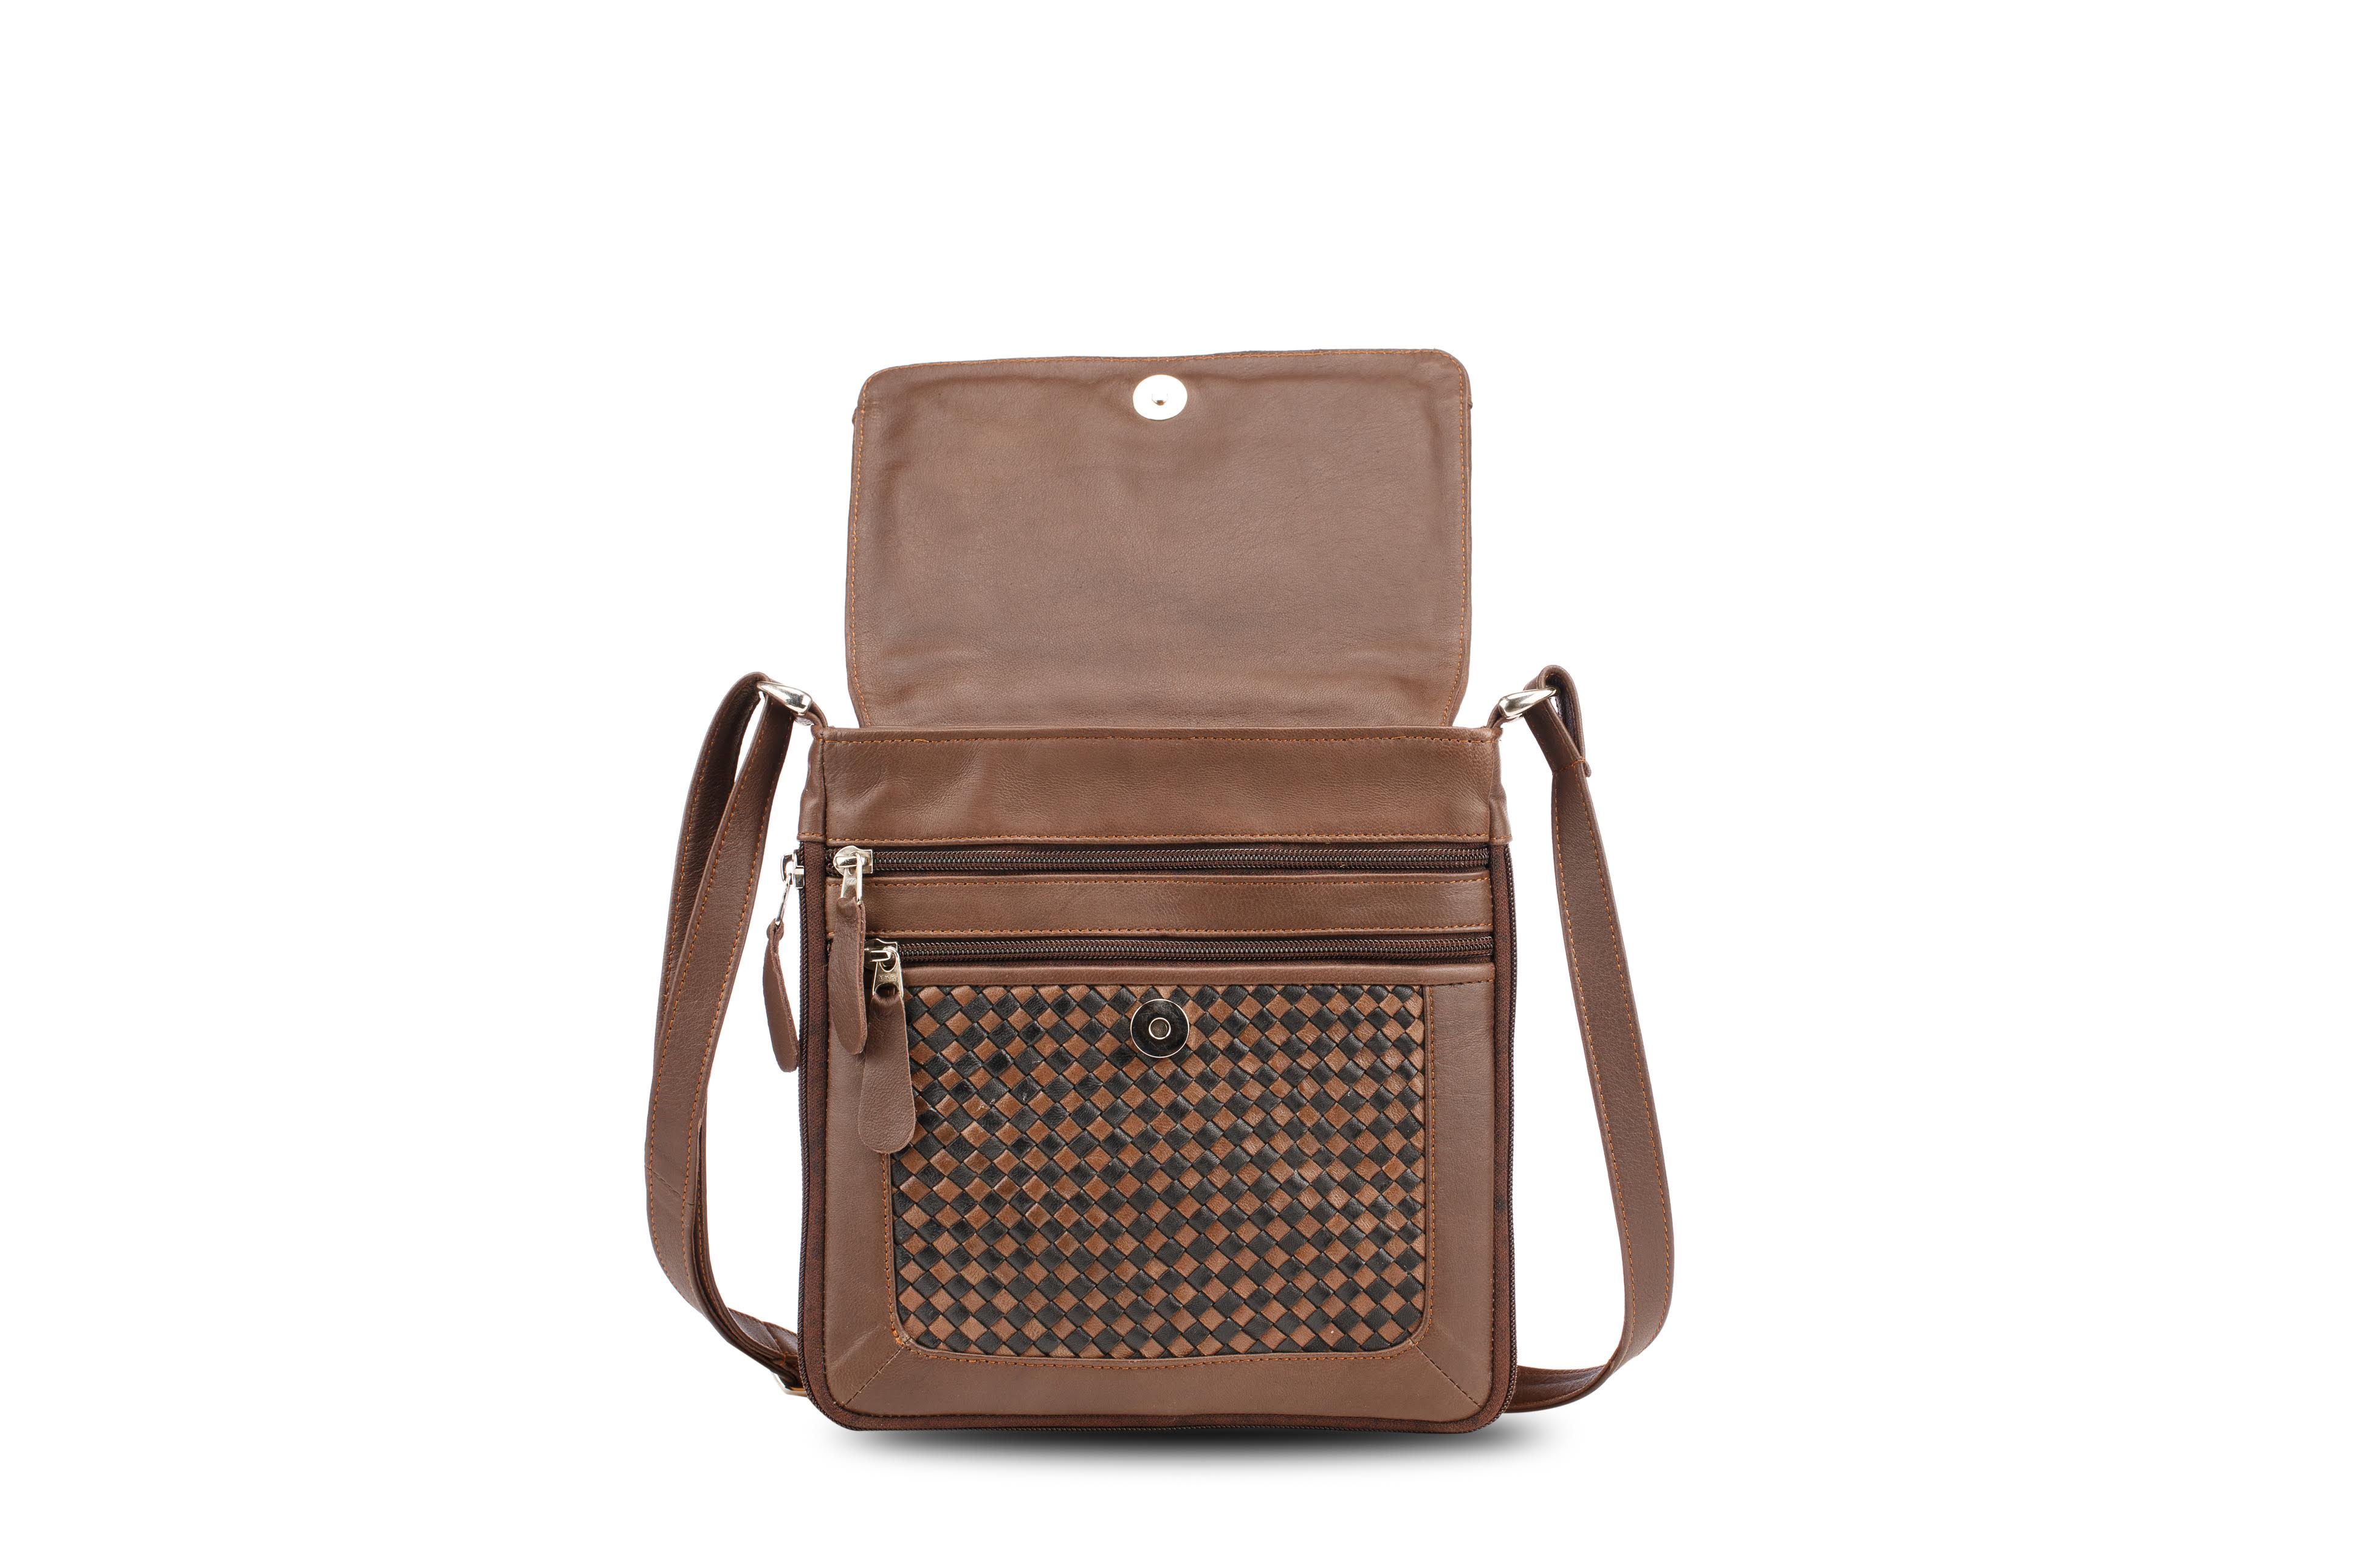 Woven Leather Cross Body Bag Black and Brown